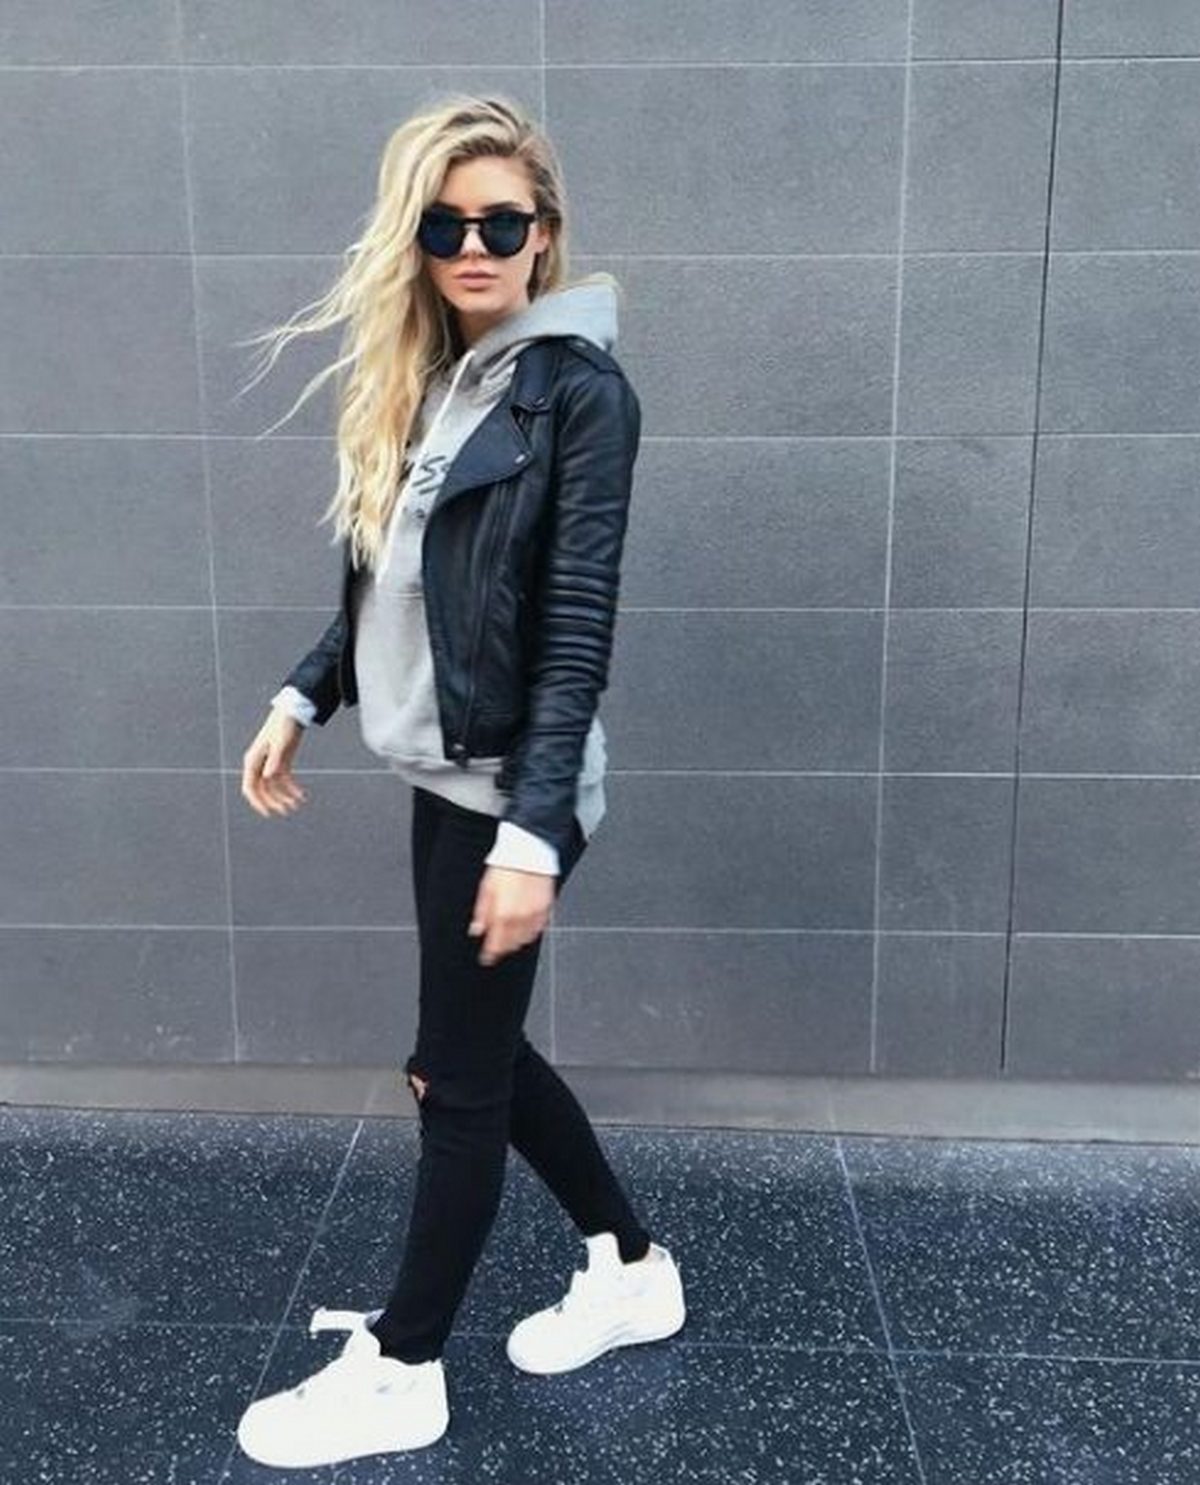 White Nike Sneakers, Black Hoodie, And Leather Jacket